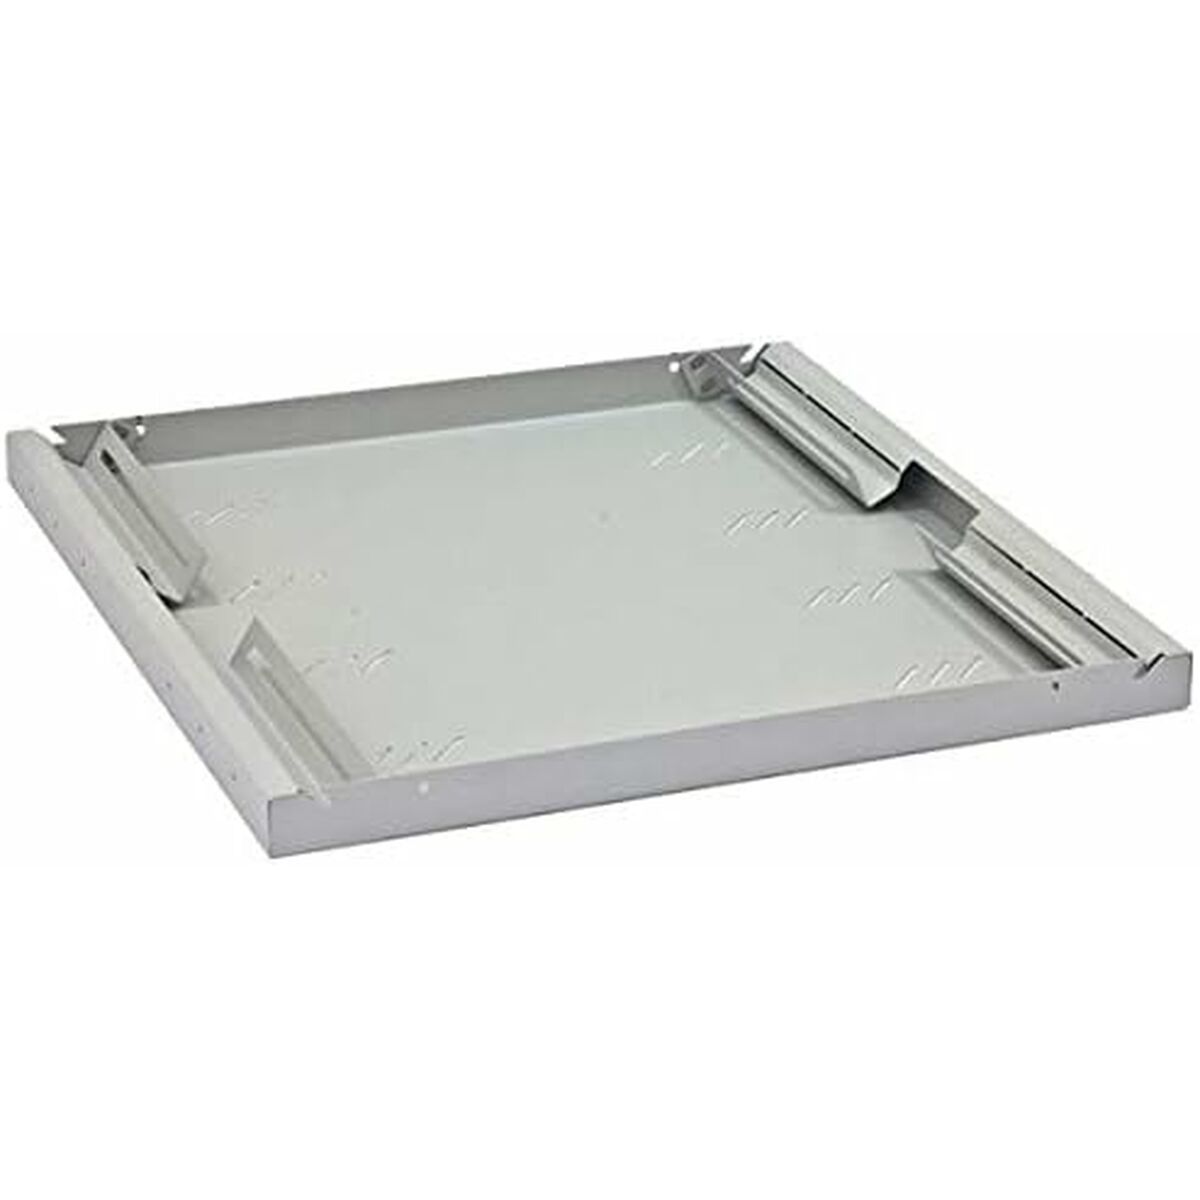 Fixed Tray for Rack Cabinet Triton RAC-UP-550-A4